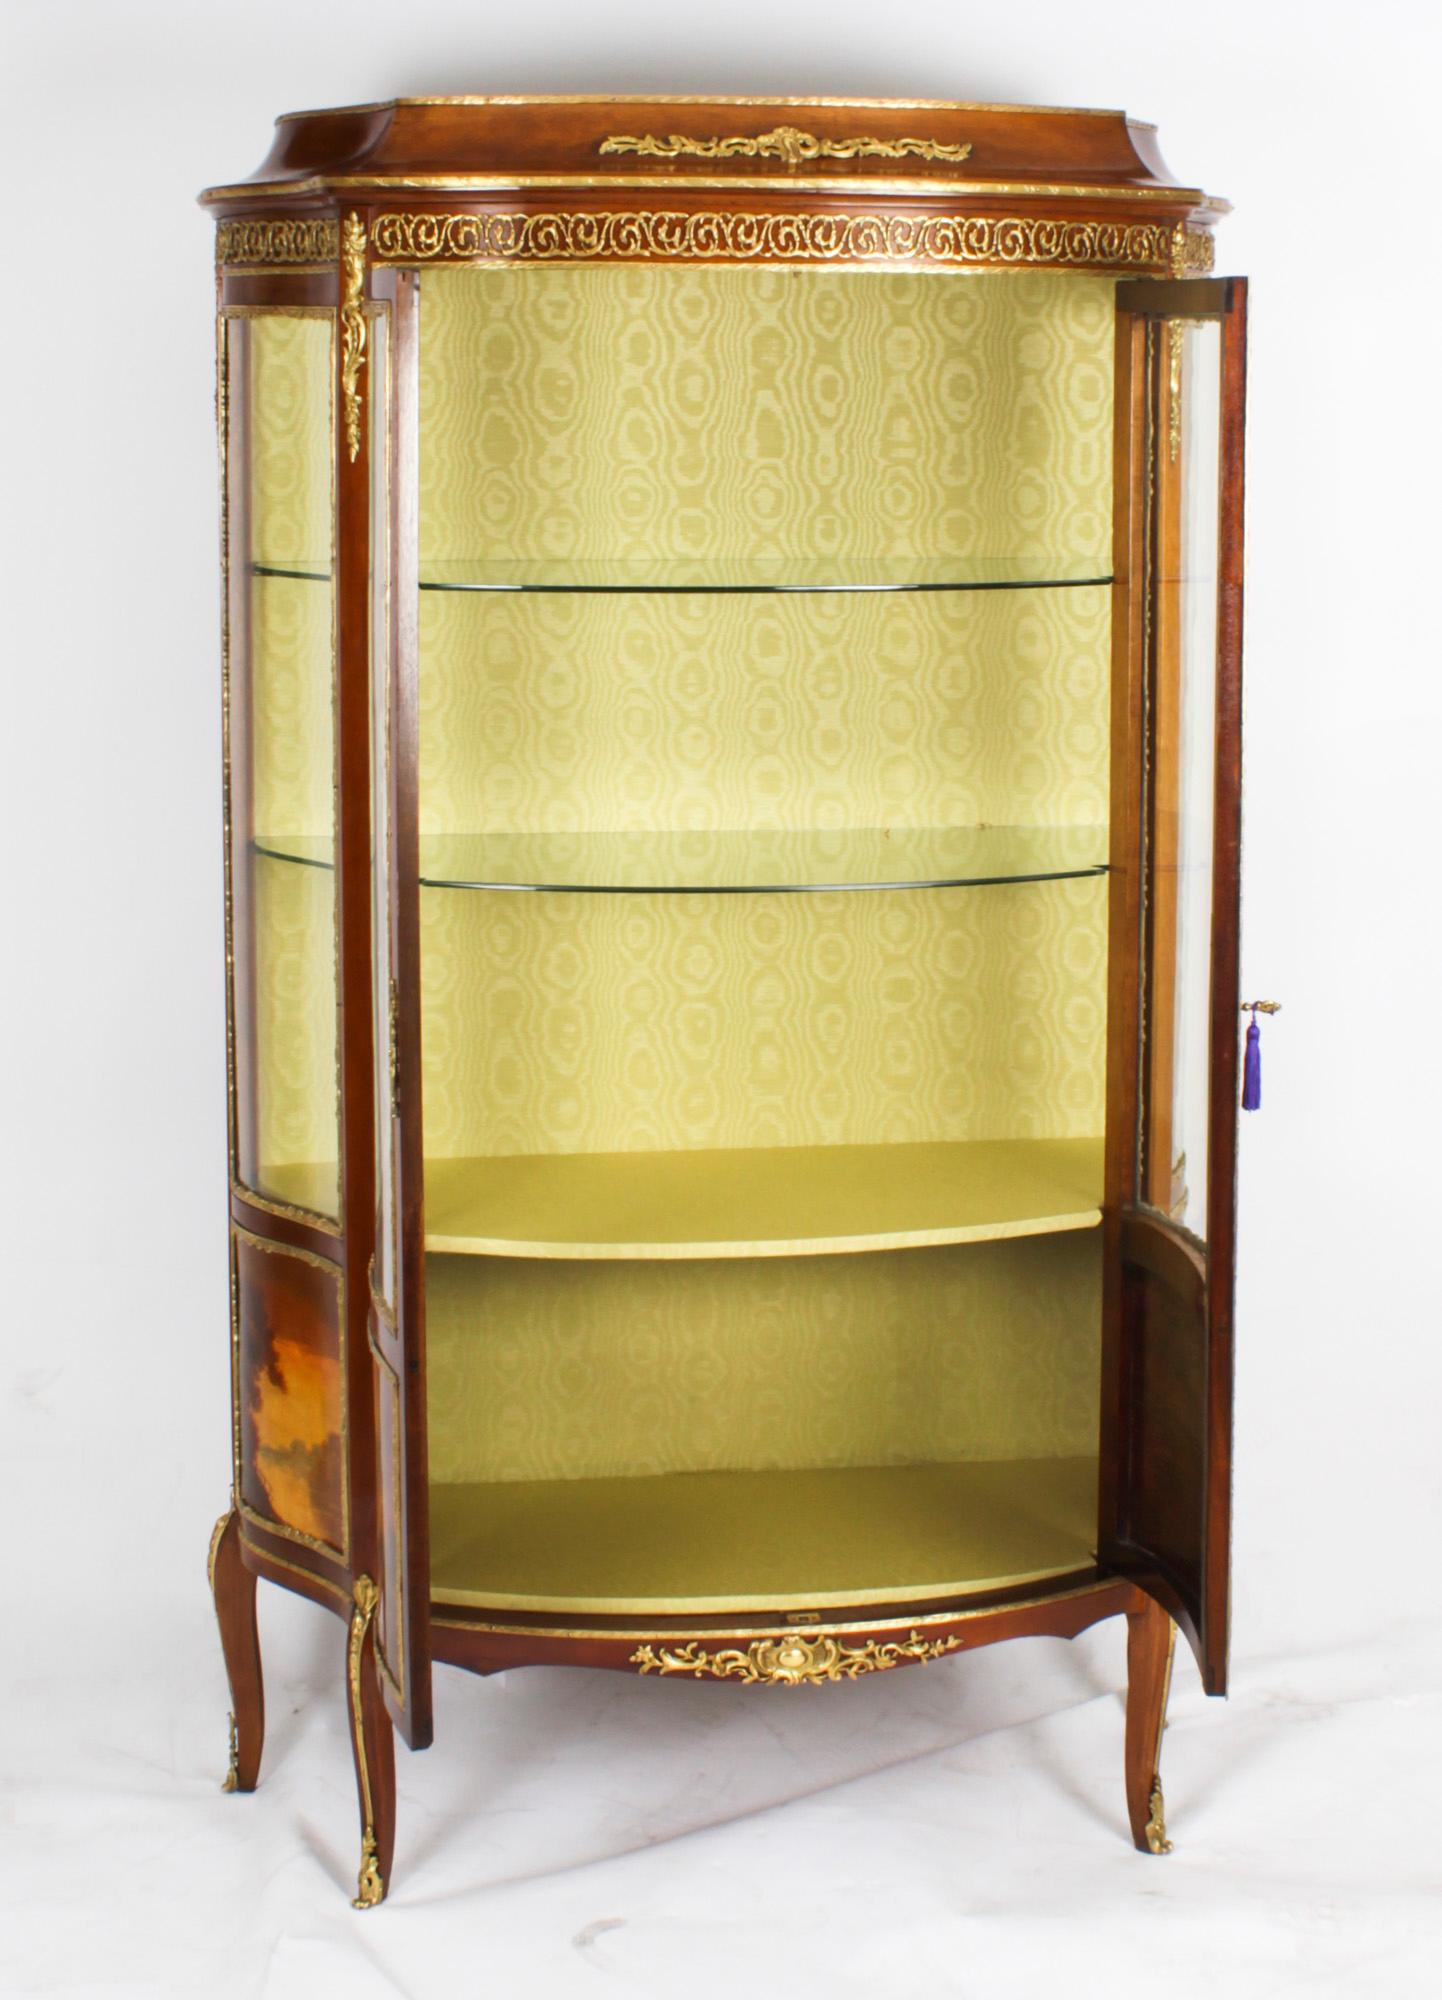 Antique French Louis Revival Vernis Martin Display Cabinet 19th Century For Sale 9